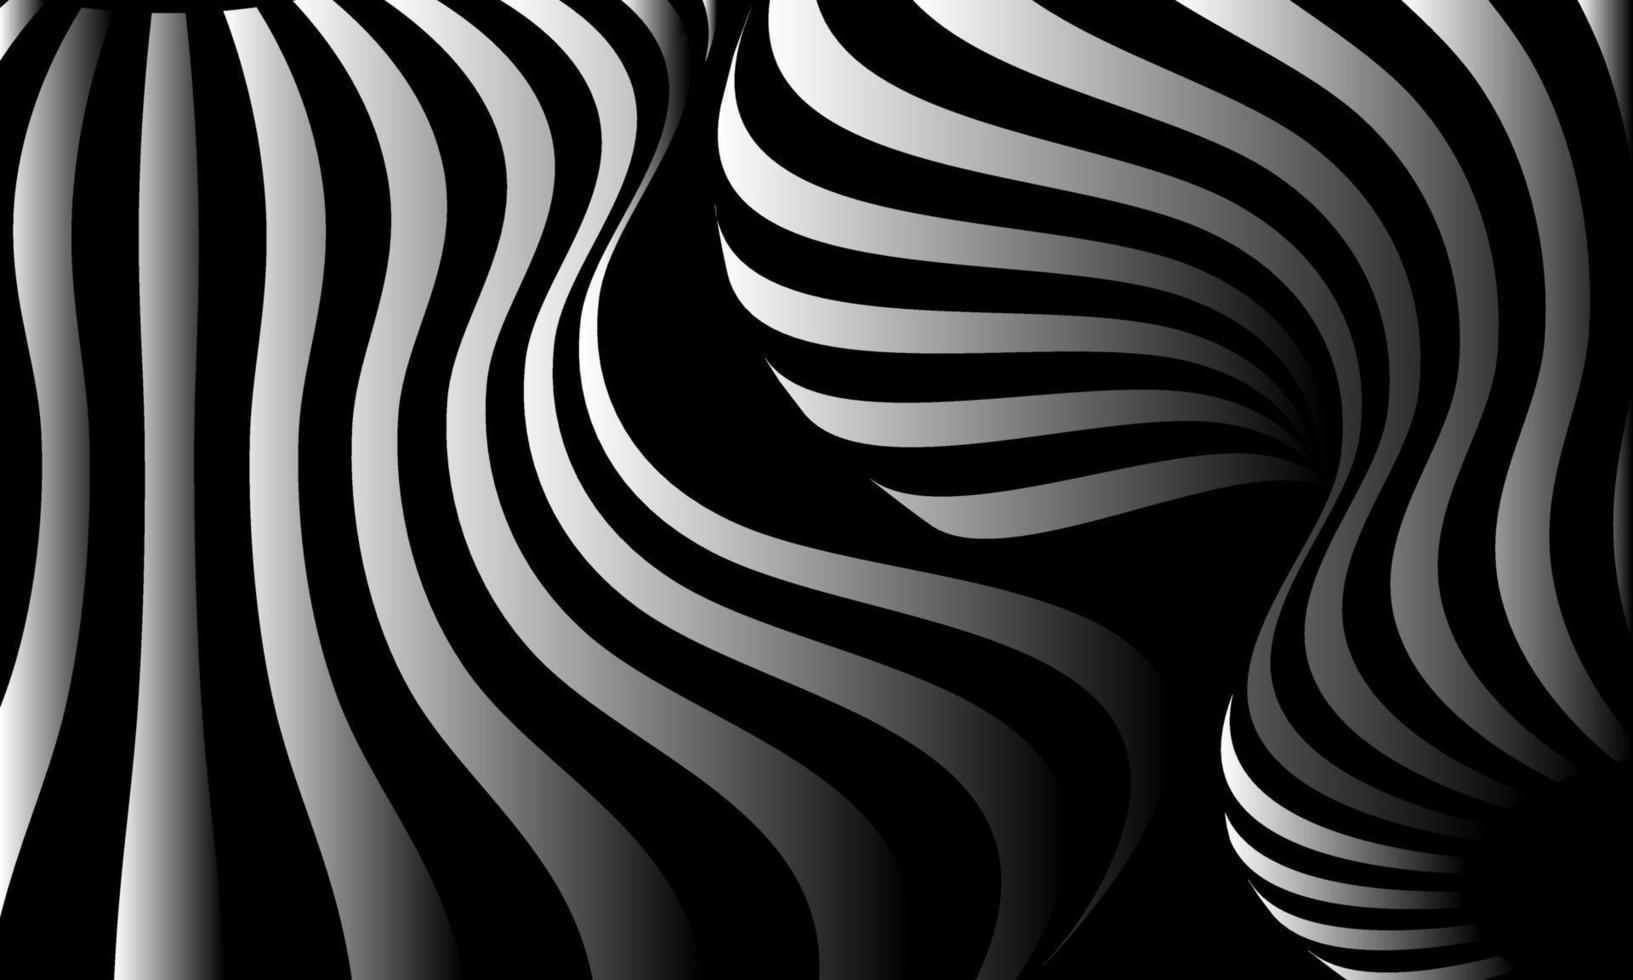 awesome  illustration optical art illusion of striped geometric black and white abstract line surface flowing part 8 vector